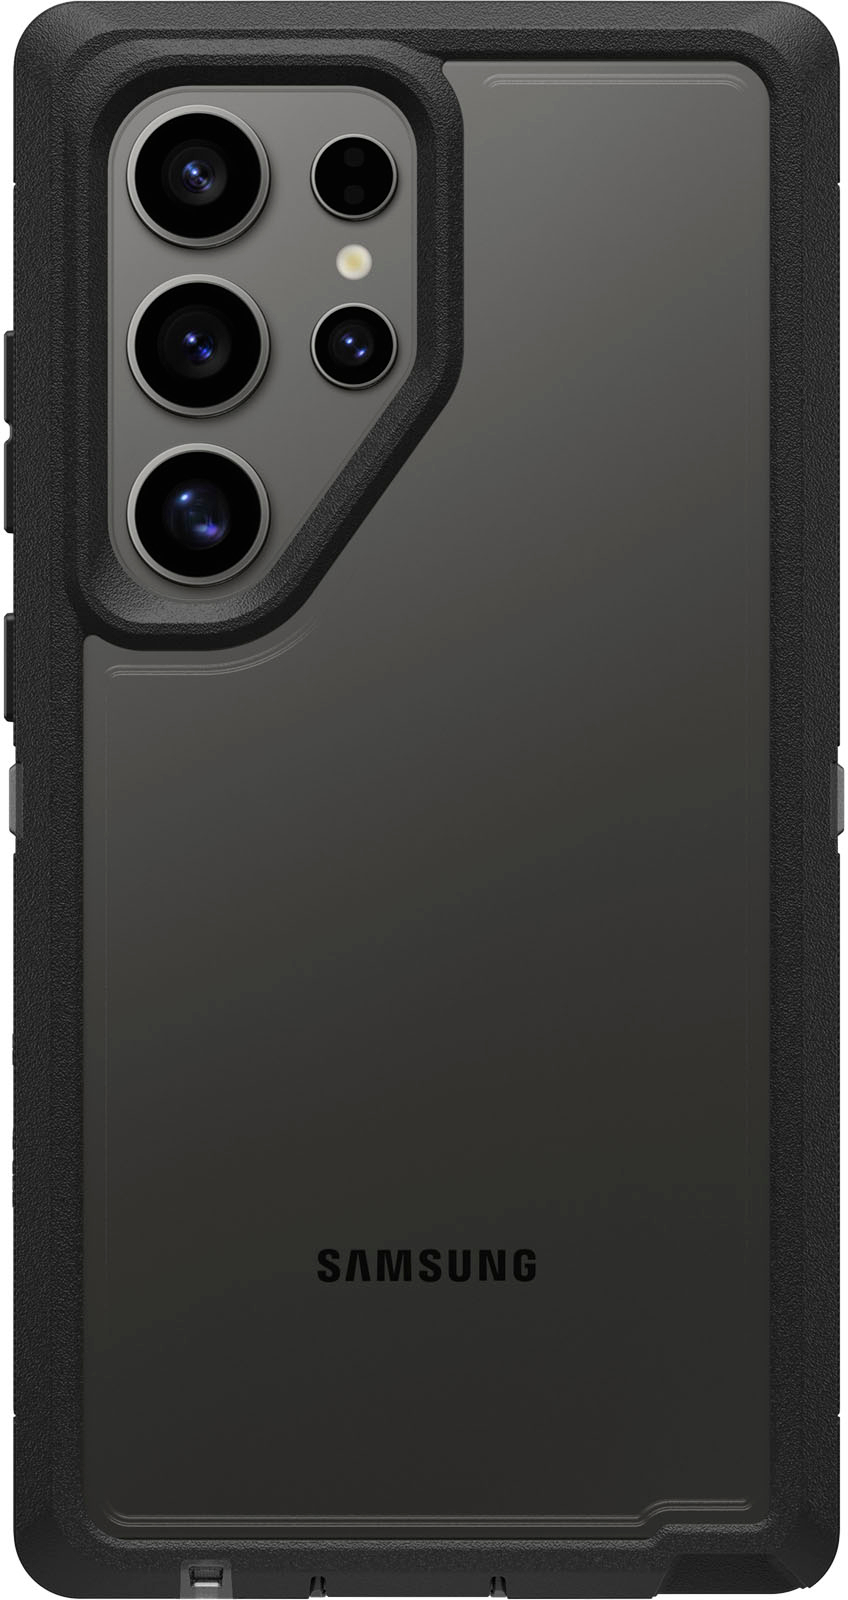 Here's the new OtterBox Galaxy S24 cases